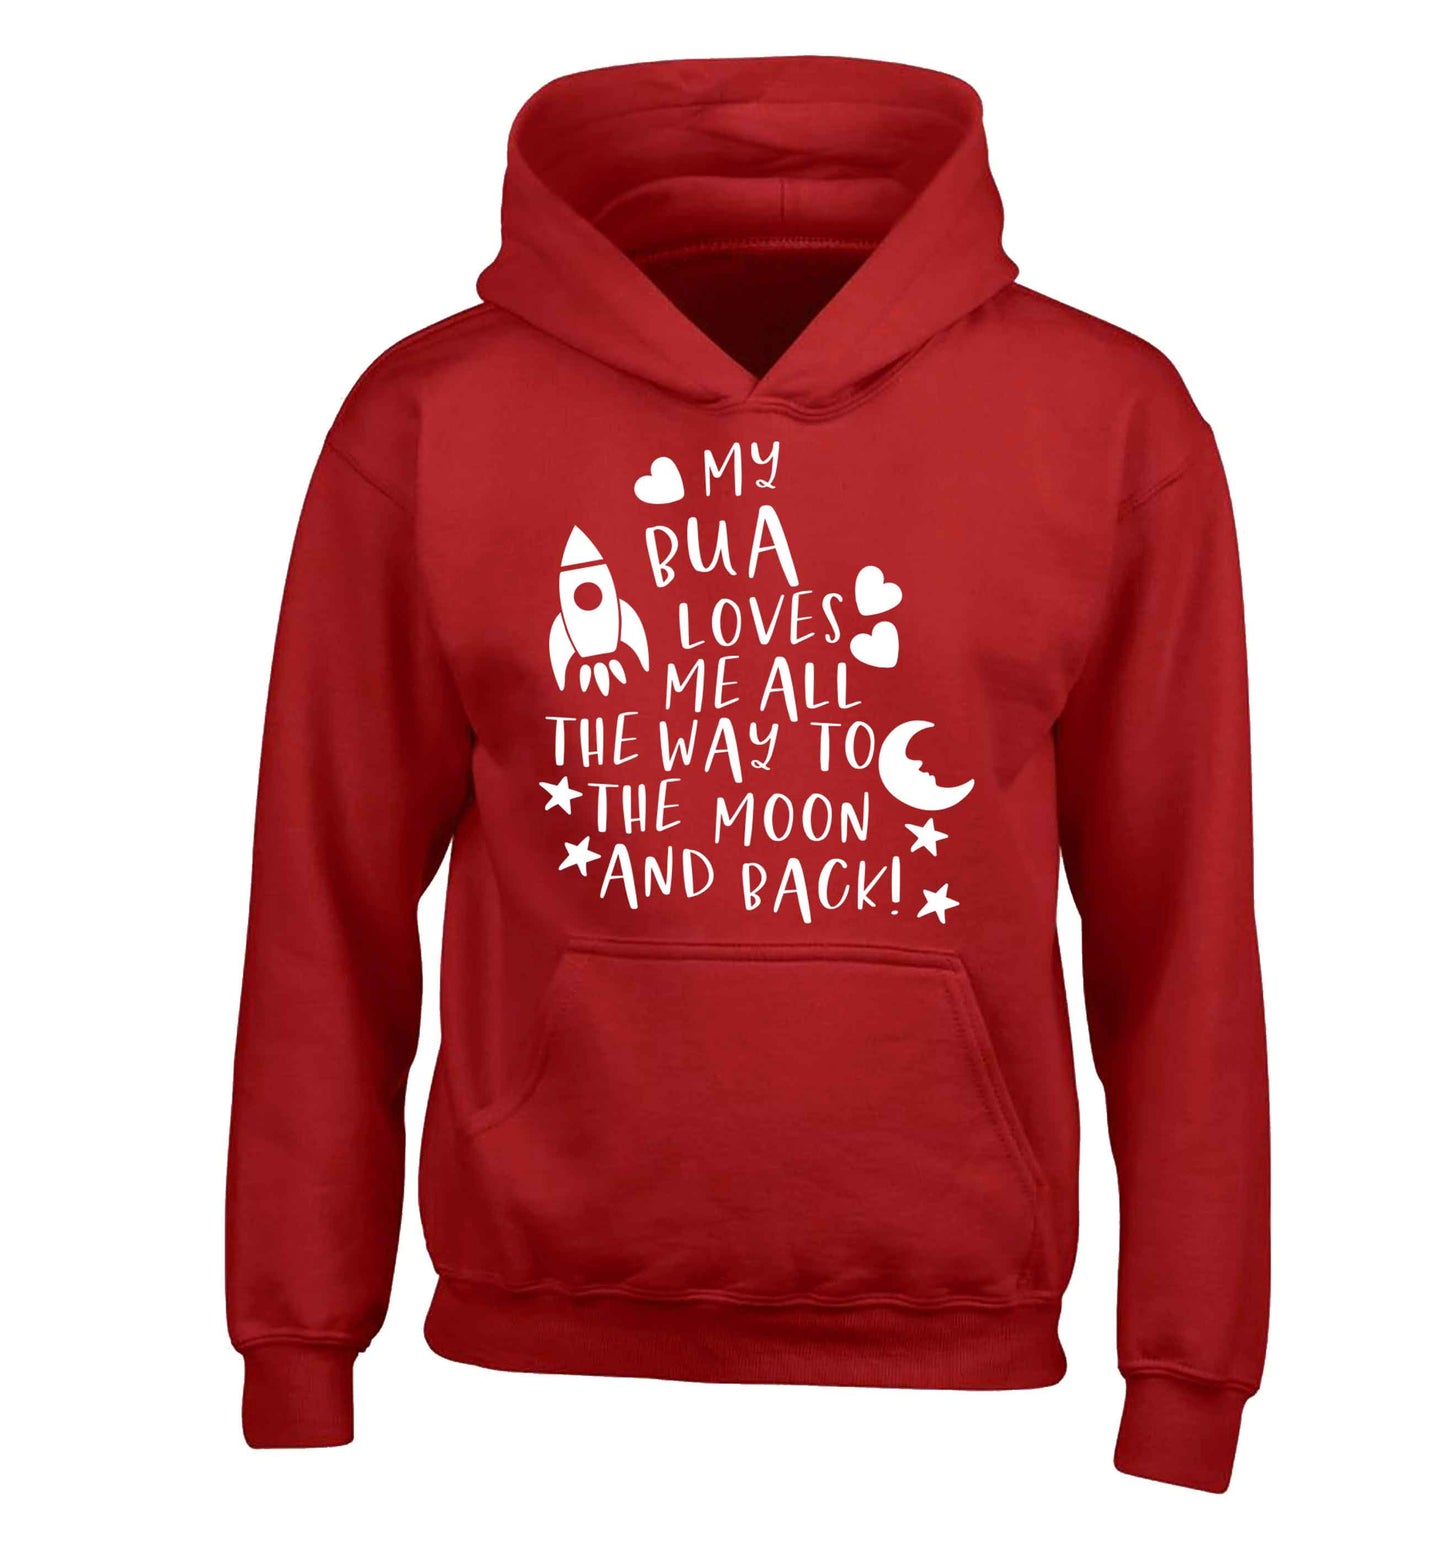 My bua loves me all they way to the moon and back children's red hoodie 12-13 Years